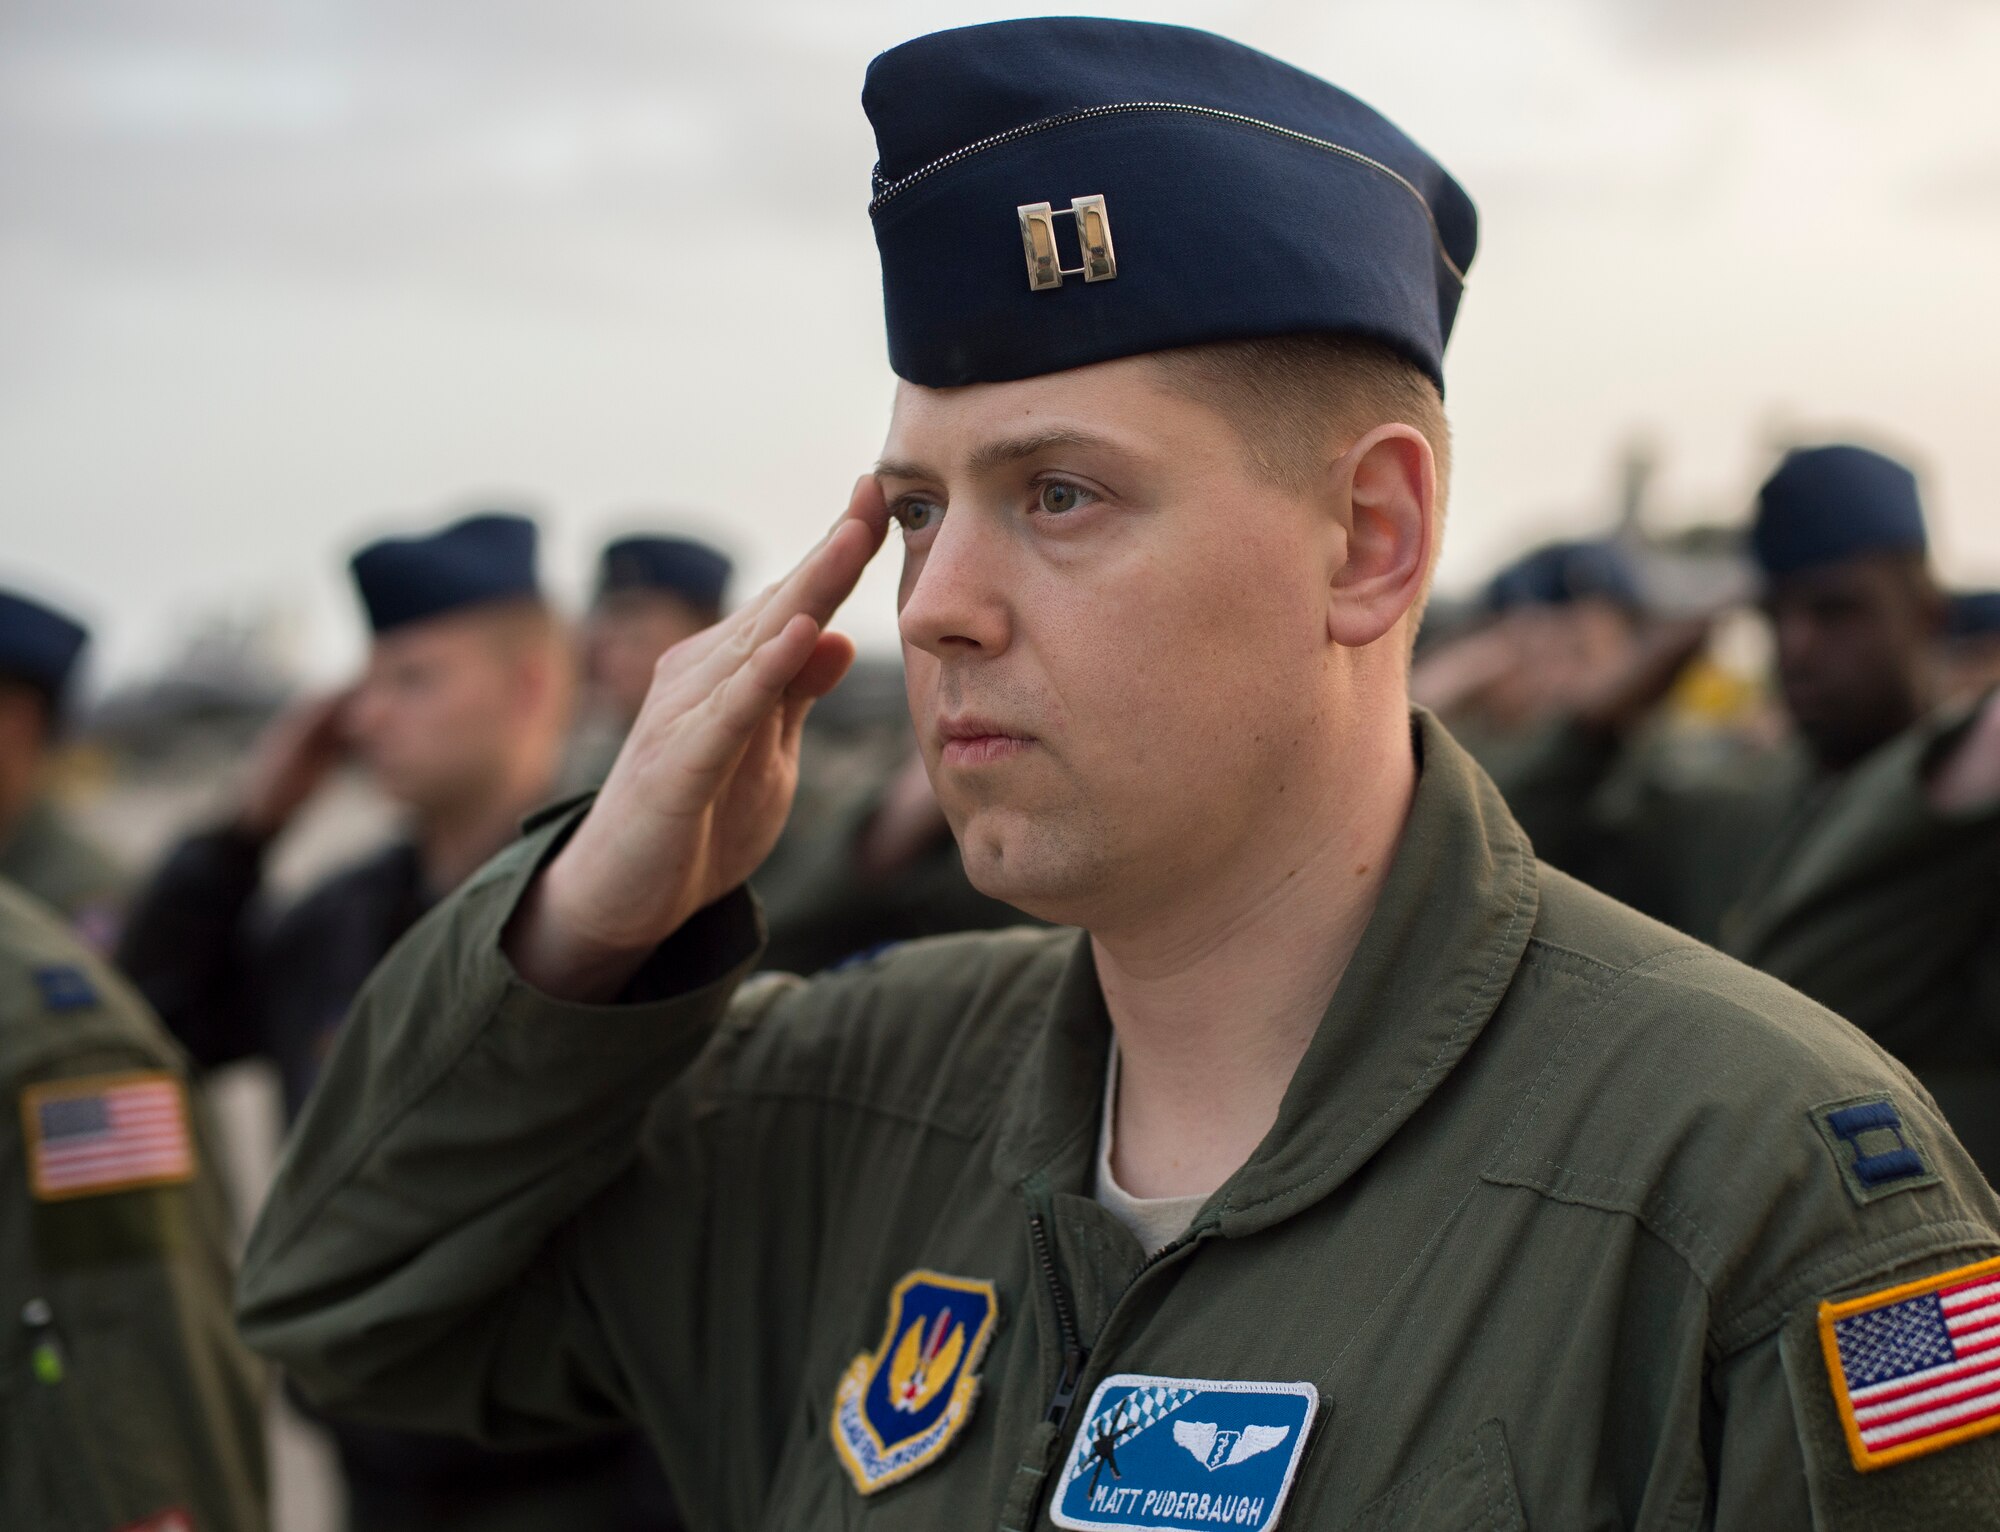 Capt. Matt Puderbaugh, 37th Airlift Squadron flight surgeon, salutes during the opening ceremony of exercise Real Thaw 16 in Beja, Portugal, Feb. 21. Real Thaw 16 is a Portuguese hosted NATO exercise that provides tactical training to multiple participating nations. Its aim is to merge and employ different aerial platforms towards one major objective, covering a vast range of activities to include Defensive and Offensive Counter Air Operations, High Value Air Assets Protection and a Slow Mover Protection. Nations participating this year include the U.S., Portugal, Belgium, Denmark, France, Netherlands, Norway and Spain. (U.S. Air Force photo/Senior Airman Jonathan Stefanko)